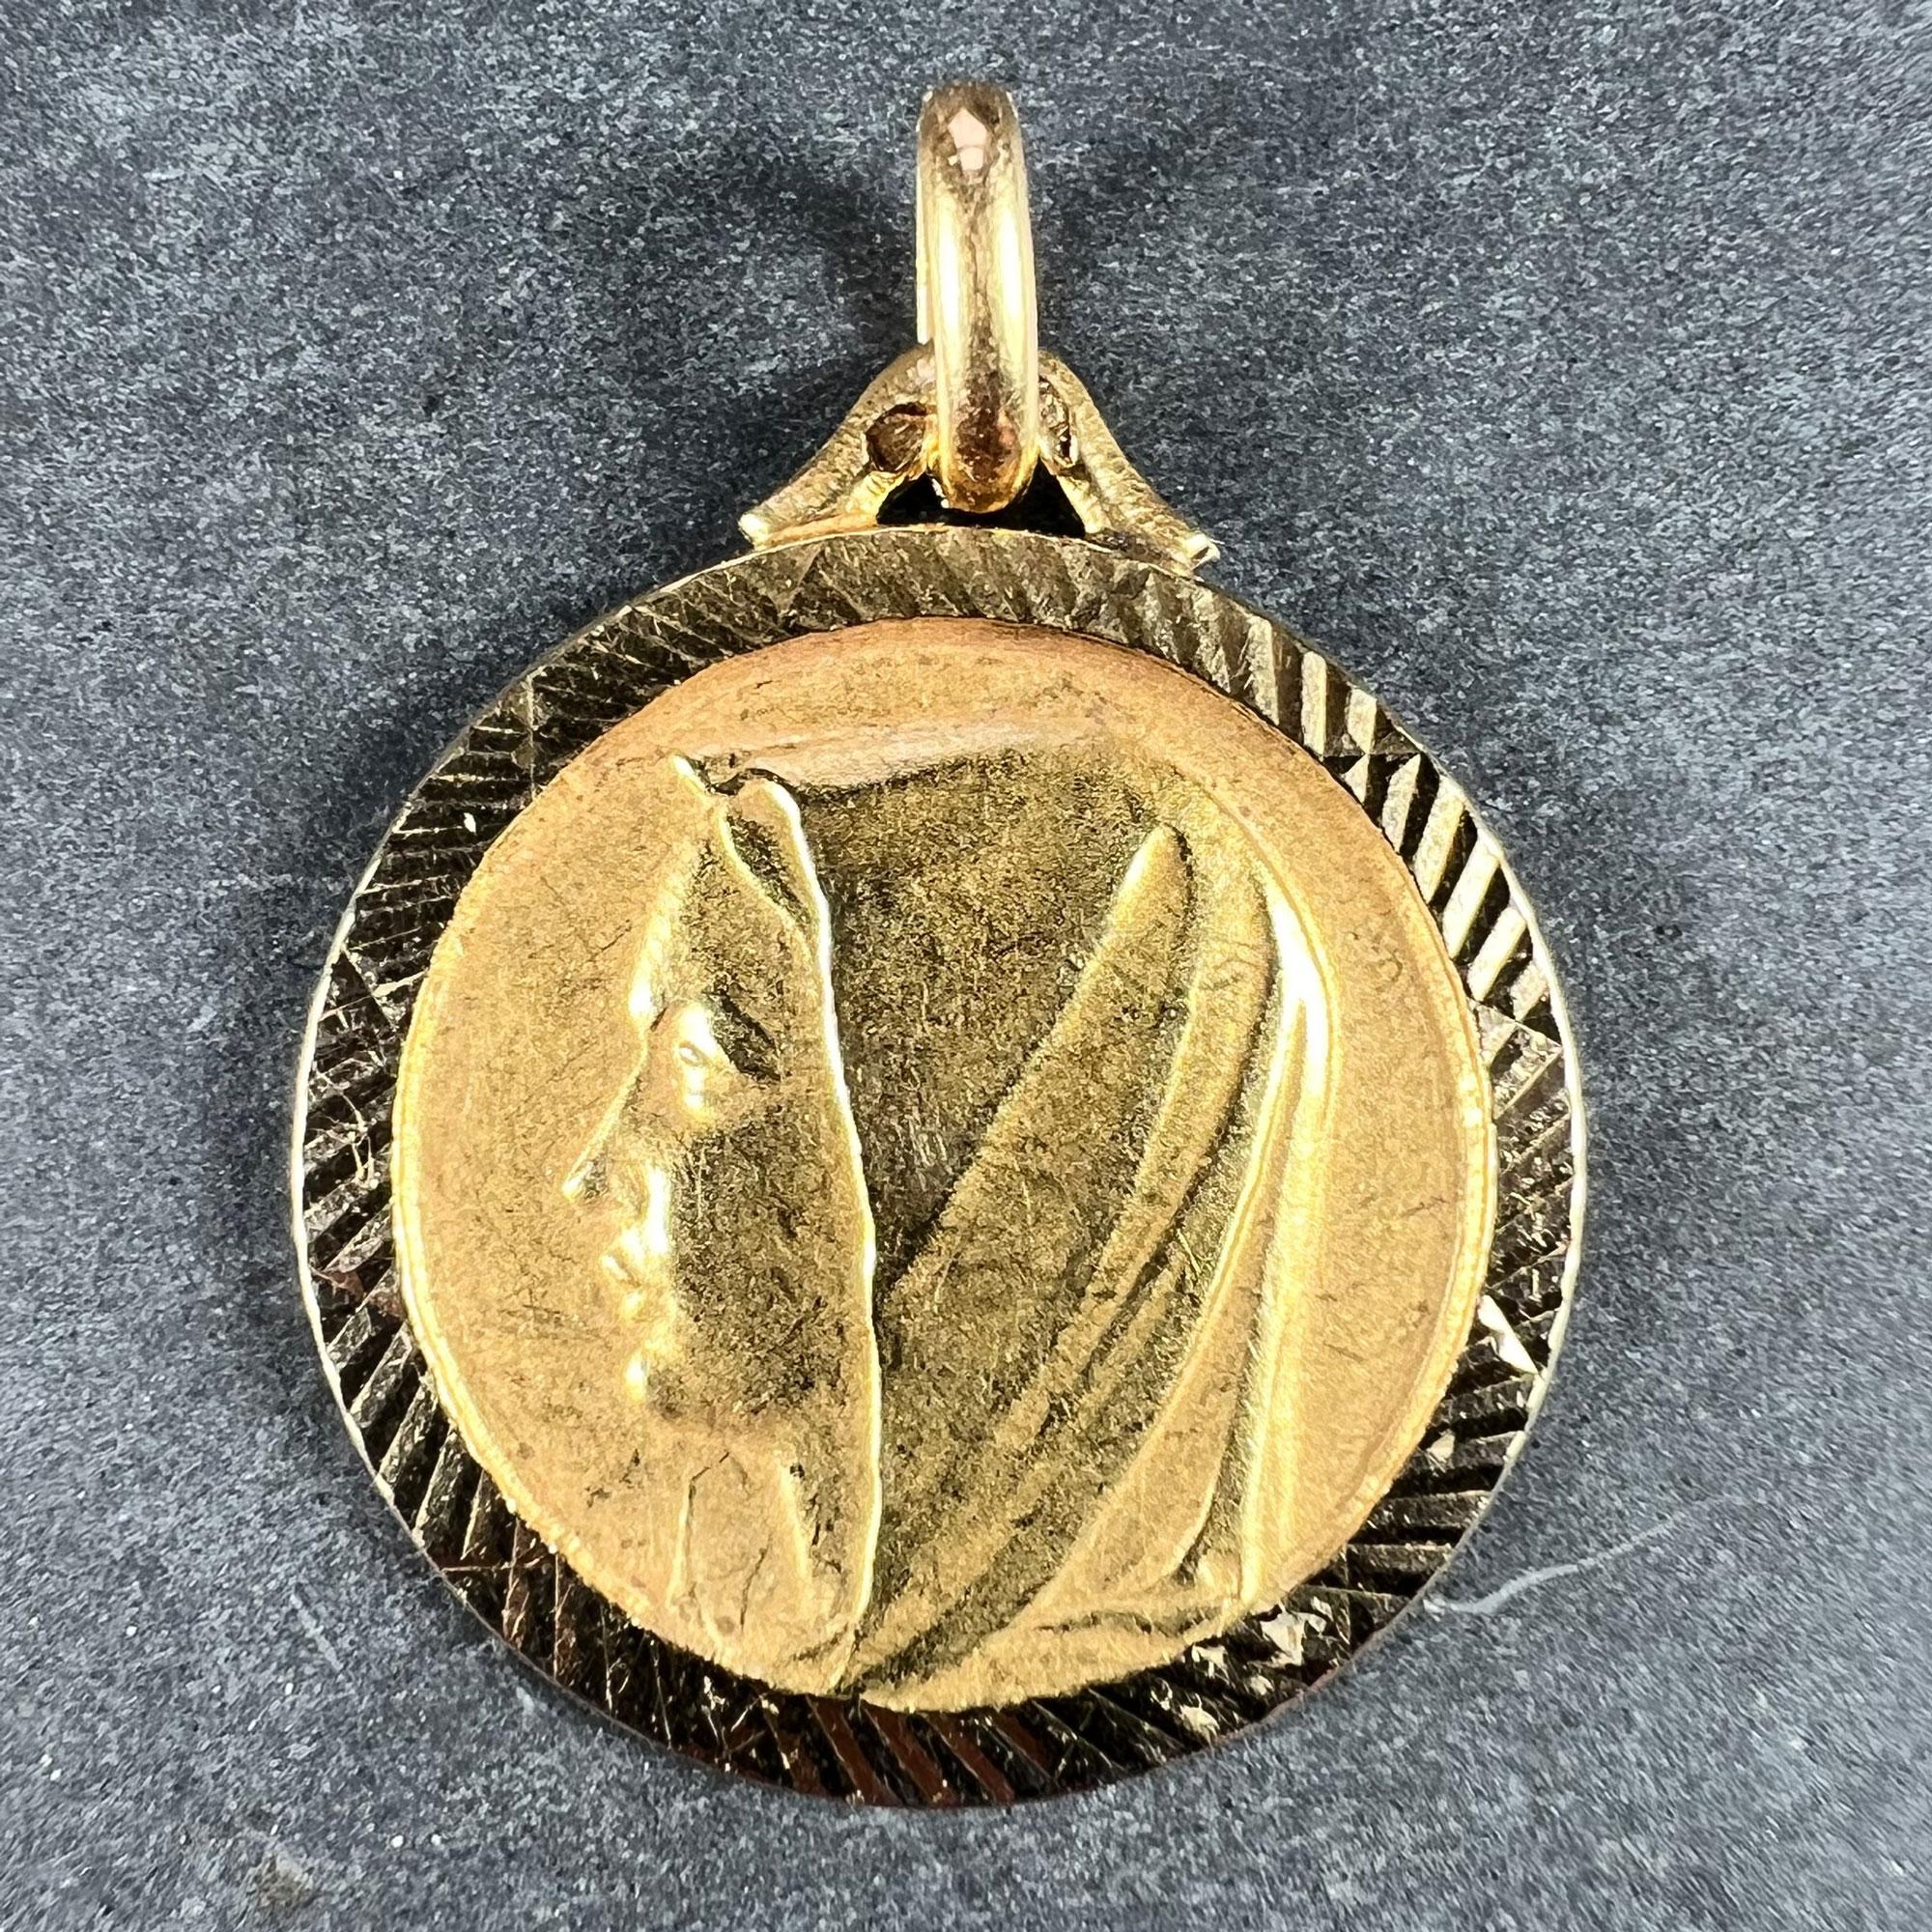 A French 18 karat (18K) yellow gold charm pendant designed as a medal depicting the Virgin Mary. Engraved to the reverse ‘Martine 27-3-57’. Stamped with the French eagle’s head for 18 karat gold and an unknown maker’s mark.

Dimensions: 2.5 x 2.1 x